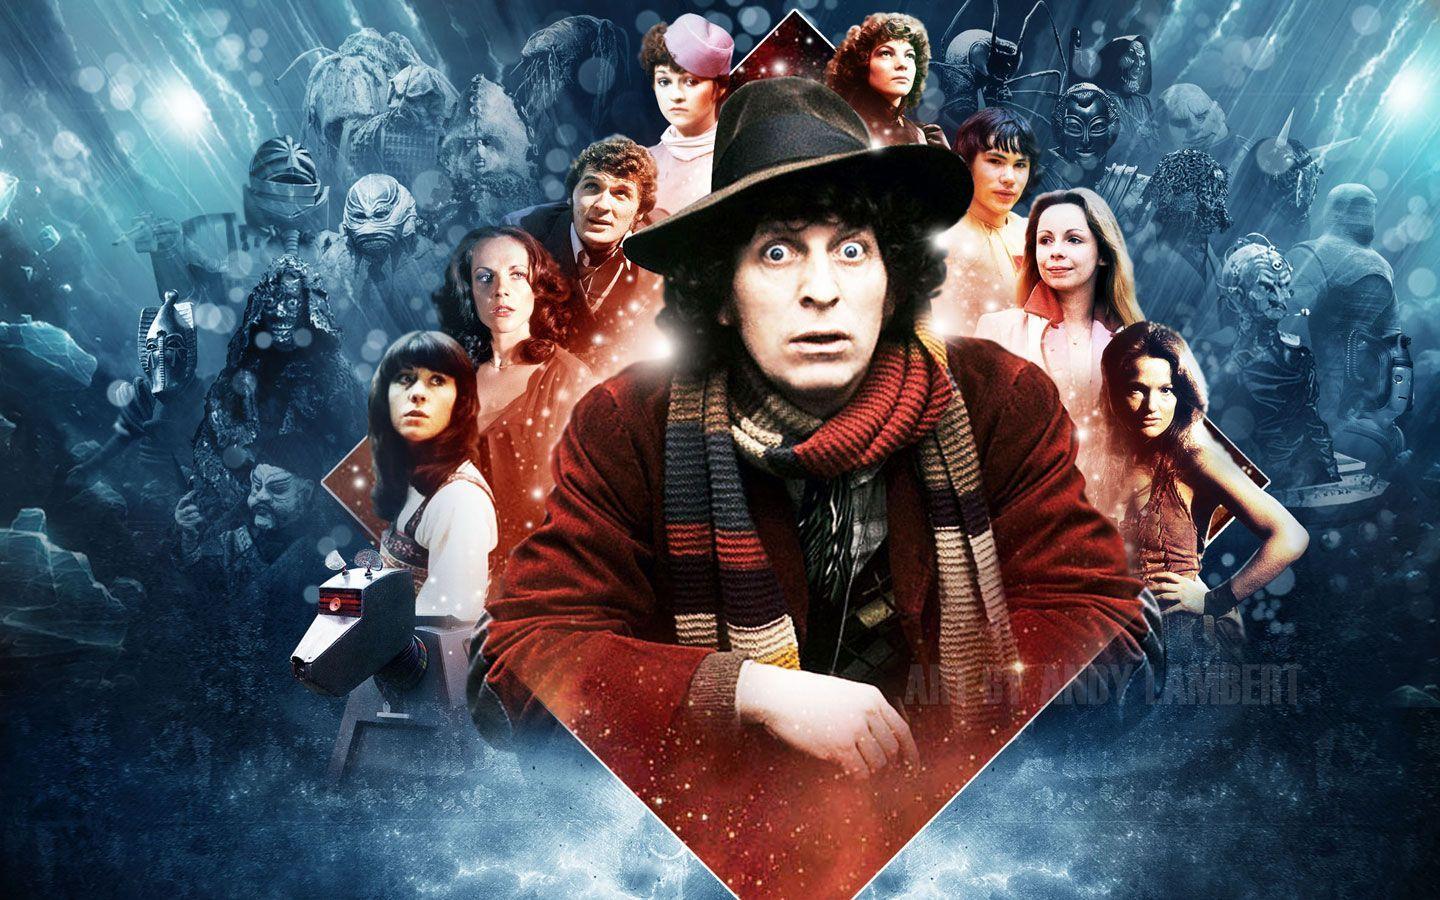 Download Movie The Fourth Doctor Wallpaper 1440x900. HD